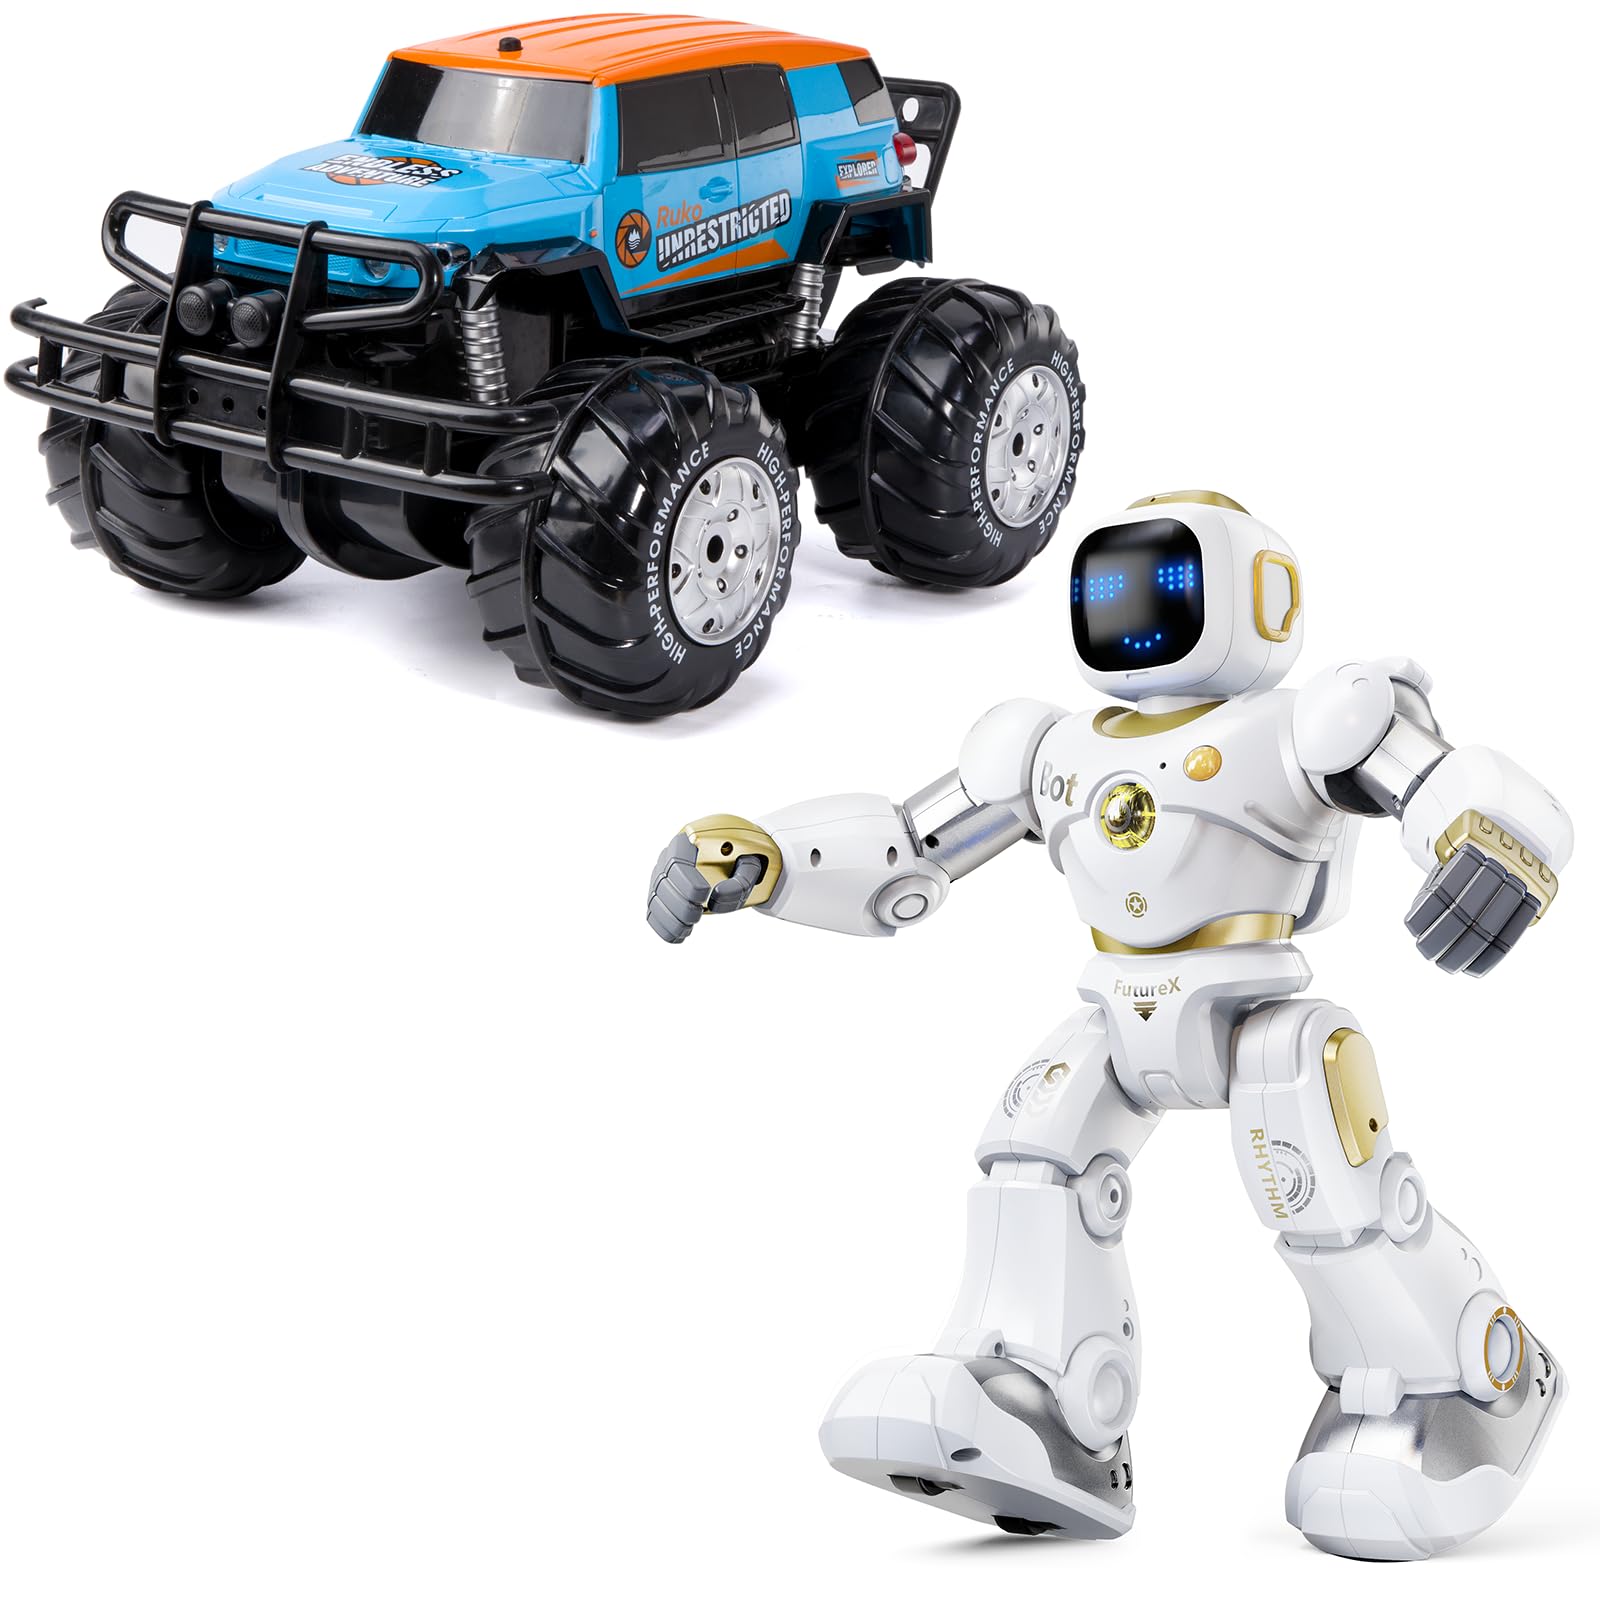 Ruko 1601AMP 1:10 Large Remote Control Waterproof Monster Truck for Boys, 4X4 Off Road All Terrain Vehicle 1088 Smart Robot Toys for Kids